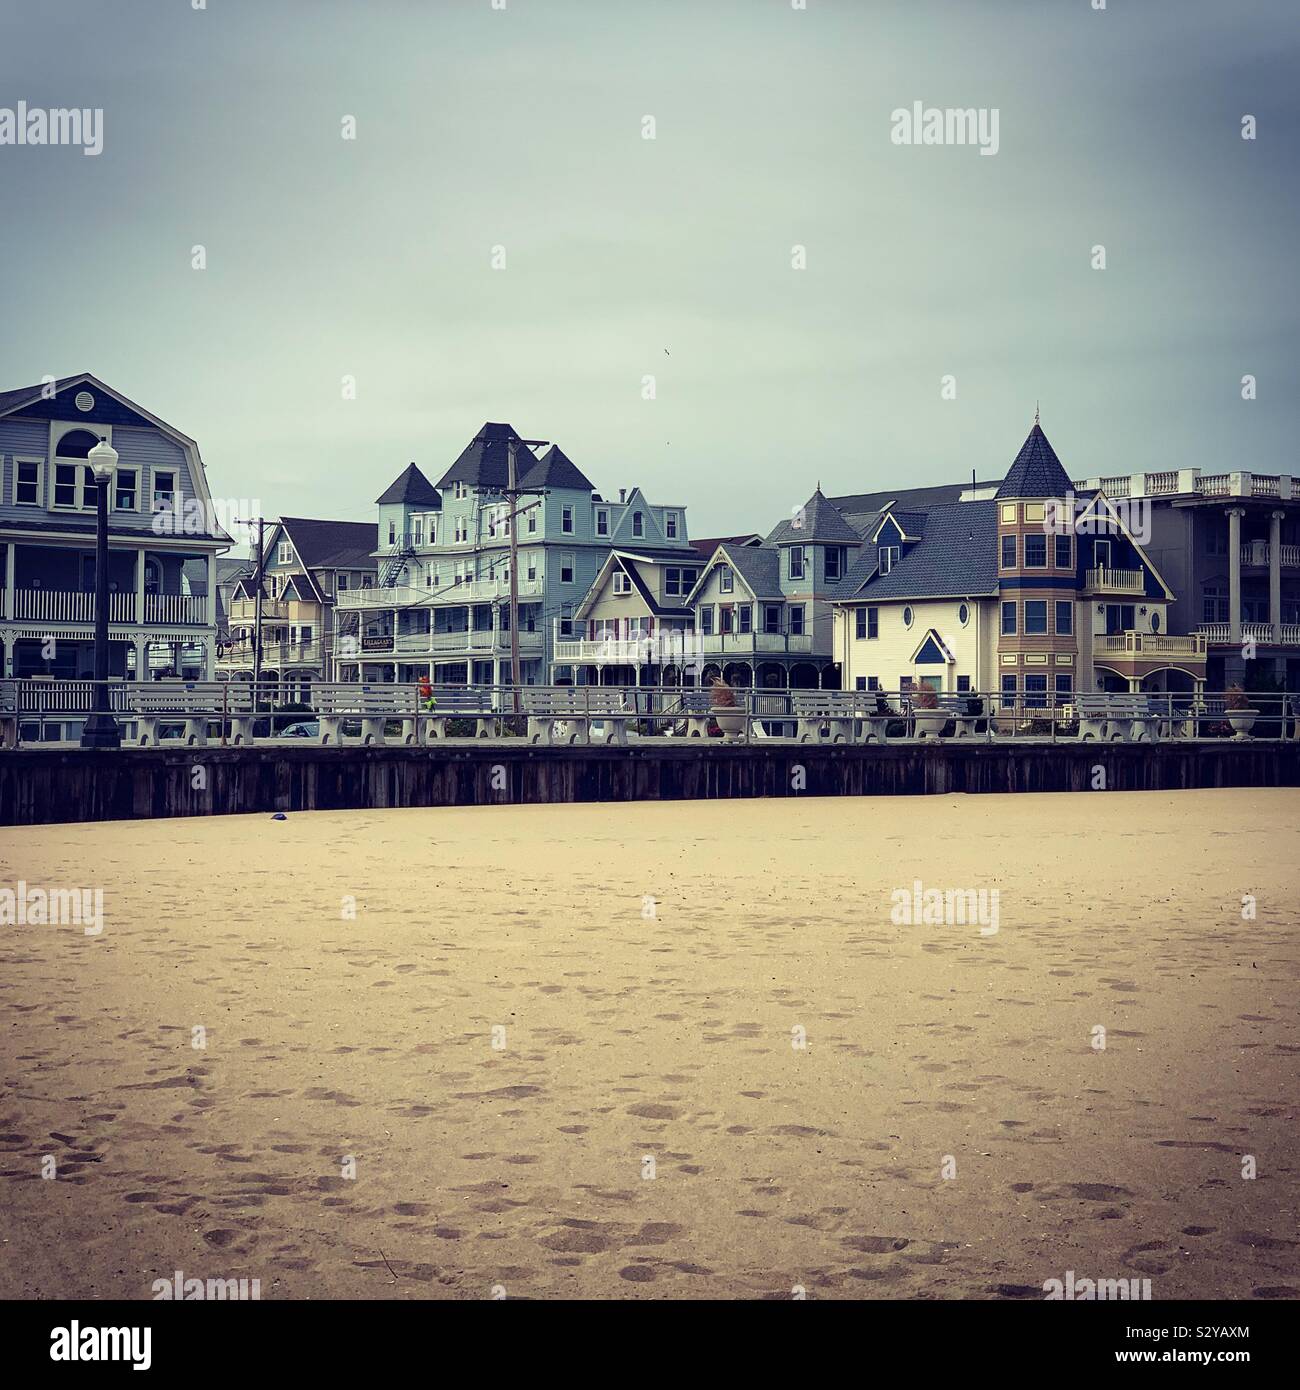 An off-season view from the beach towards the boardwalk and Victorian architecture in Ocean Grove, Neptune Township, Monmouth County, New Jersey, United States Stock Photo